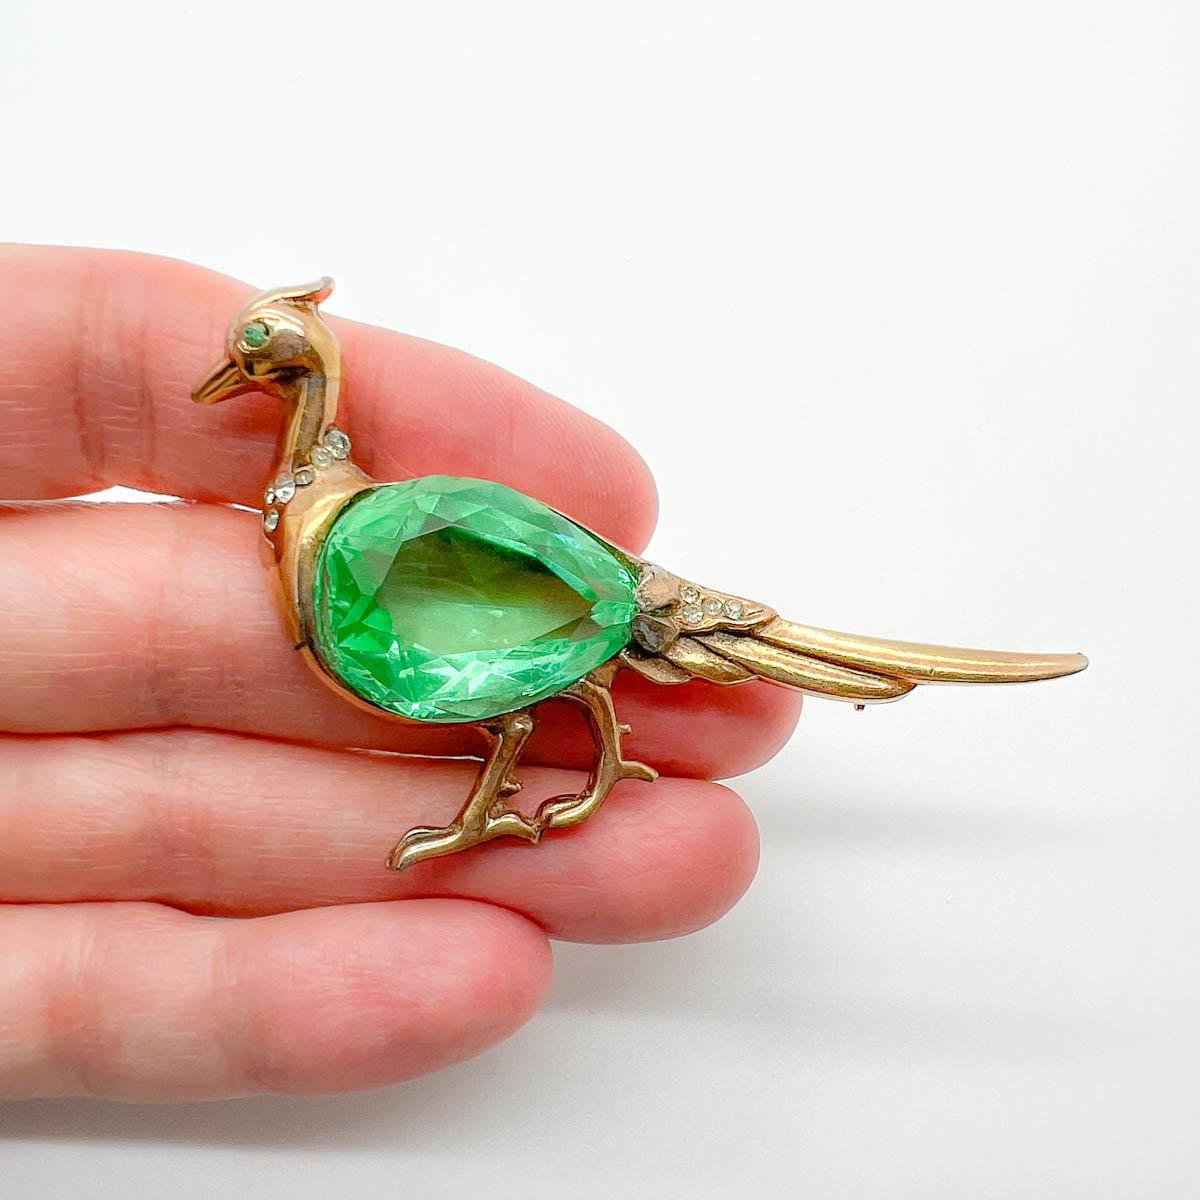 A charming Vintage Reja Peacock Brooch. Golden metalwork surrounds a huge green fancy cut crystal depicting the Peacock's body. A rare and whimsical treasure from costume jewel house Reja in the 1940s. Totally charming lapel decoration.
Reja was